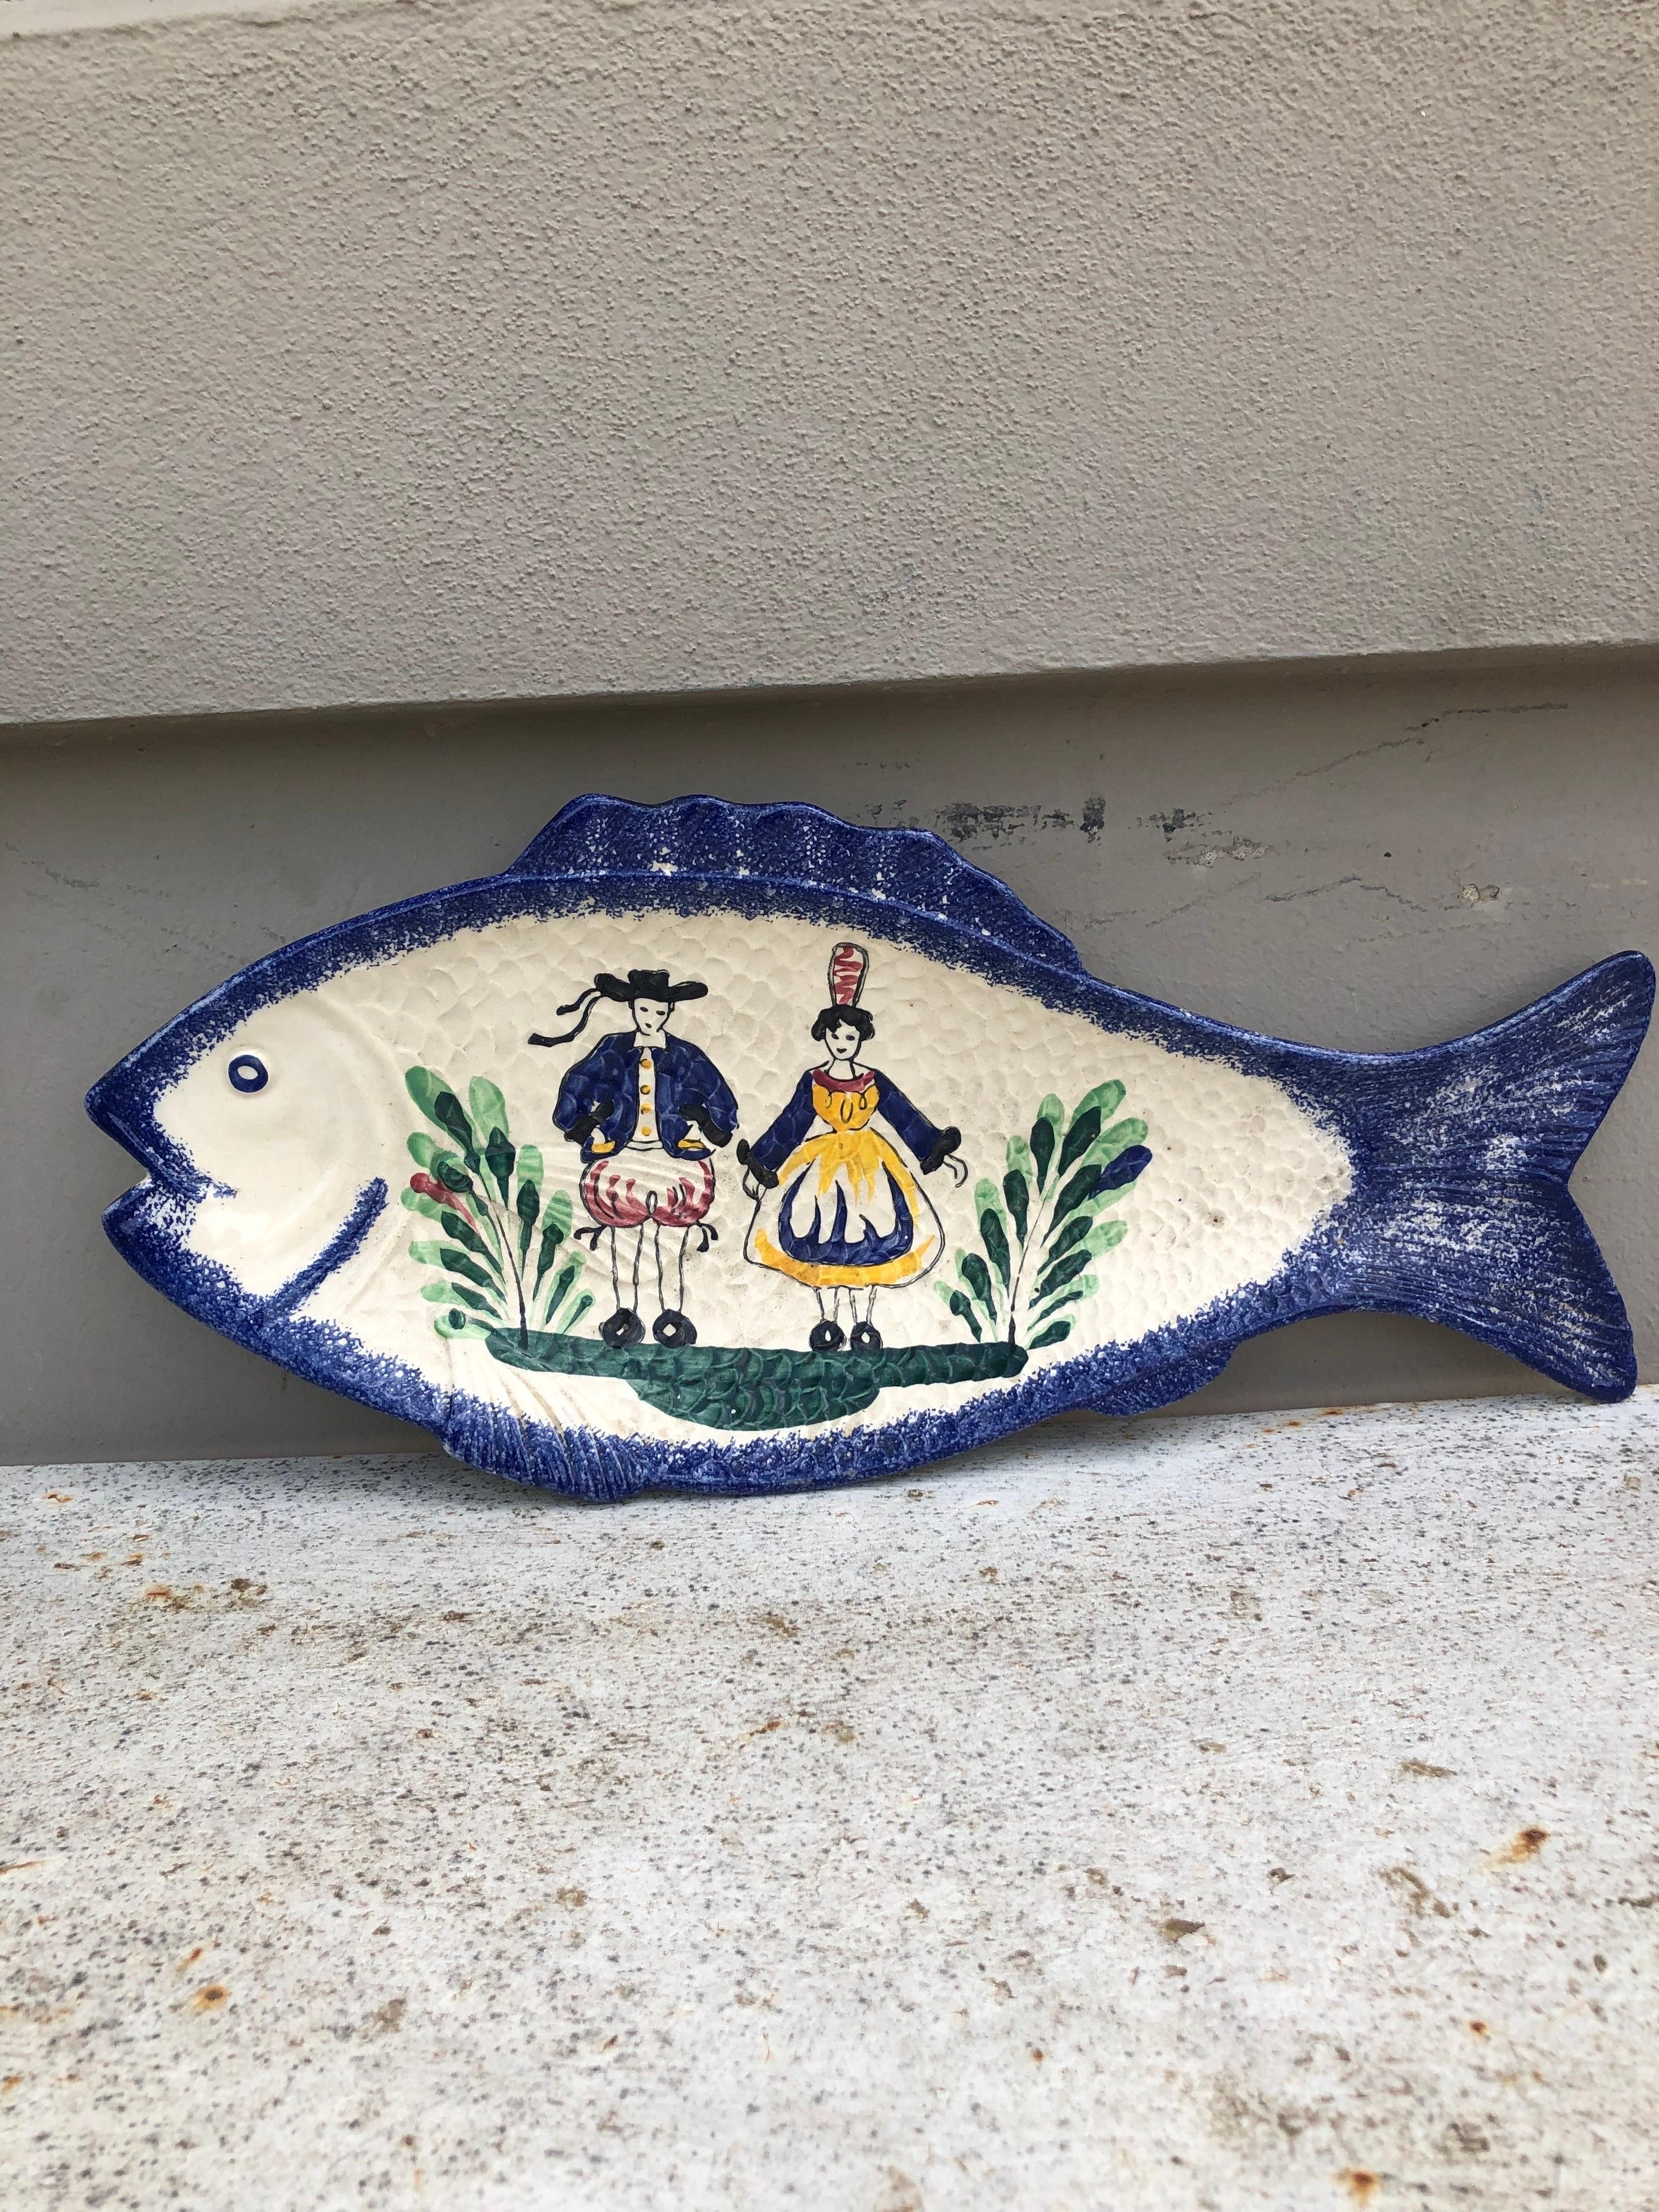 Large French Faience fish platter Circa 1950.
Marked Saint Pierre Penmarc'h
Handed paint.